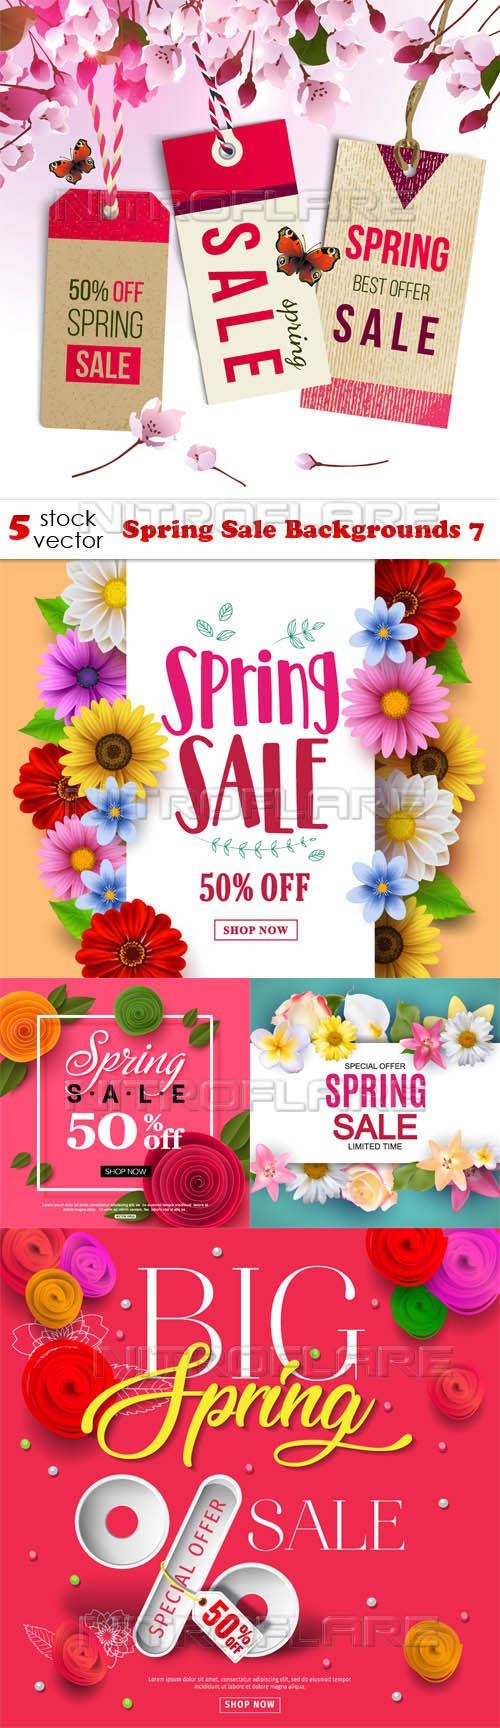 Spring Sale Backgrounds 7 ((aitff (8 files)